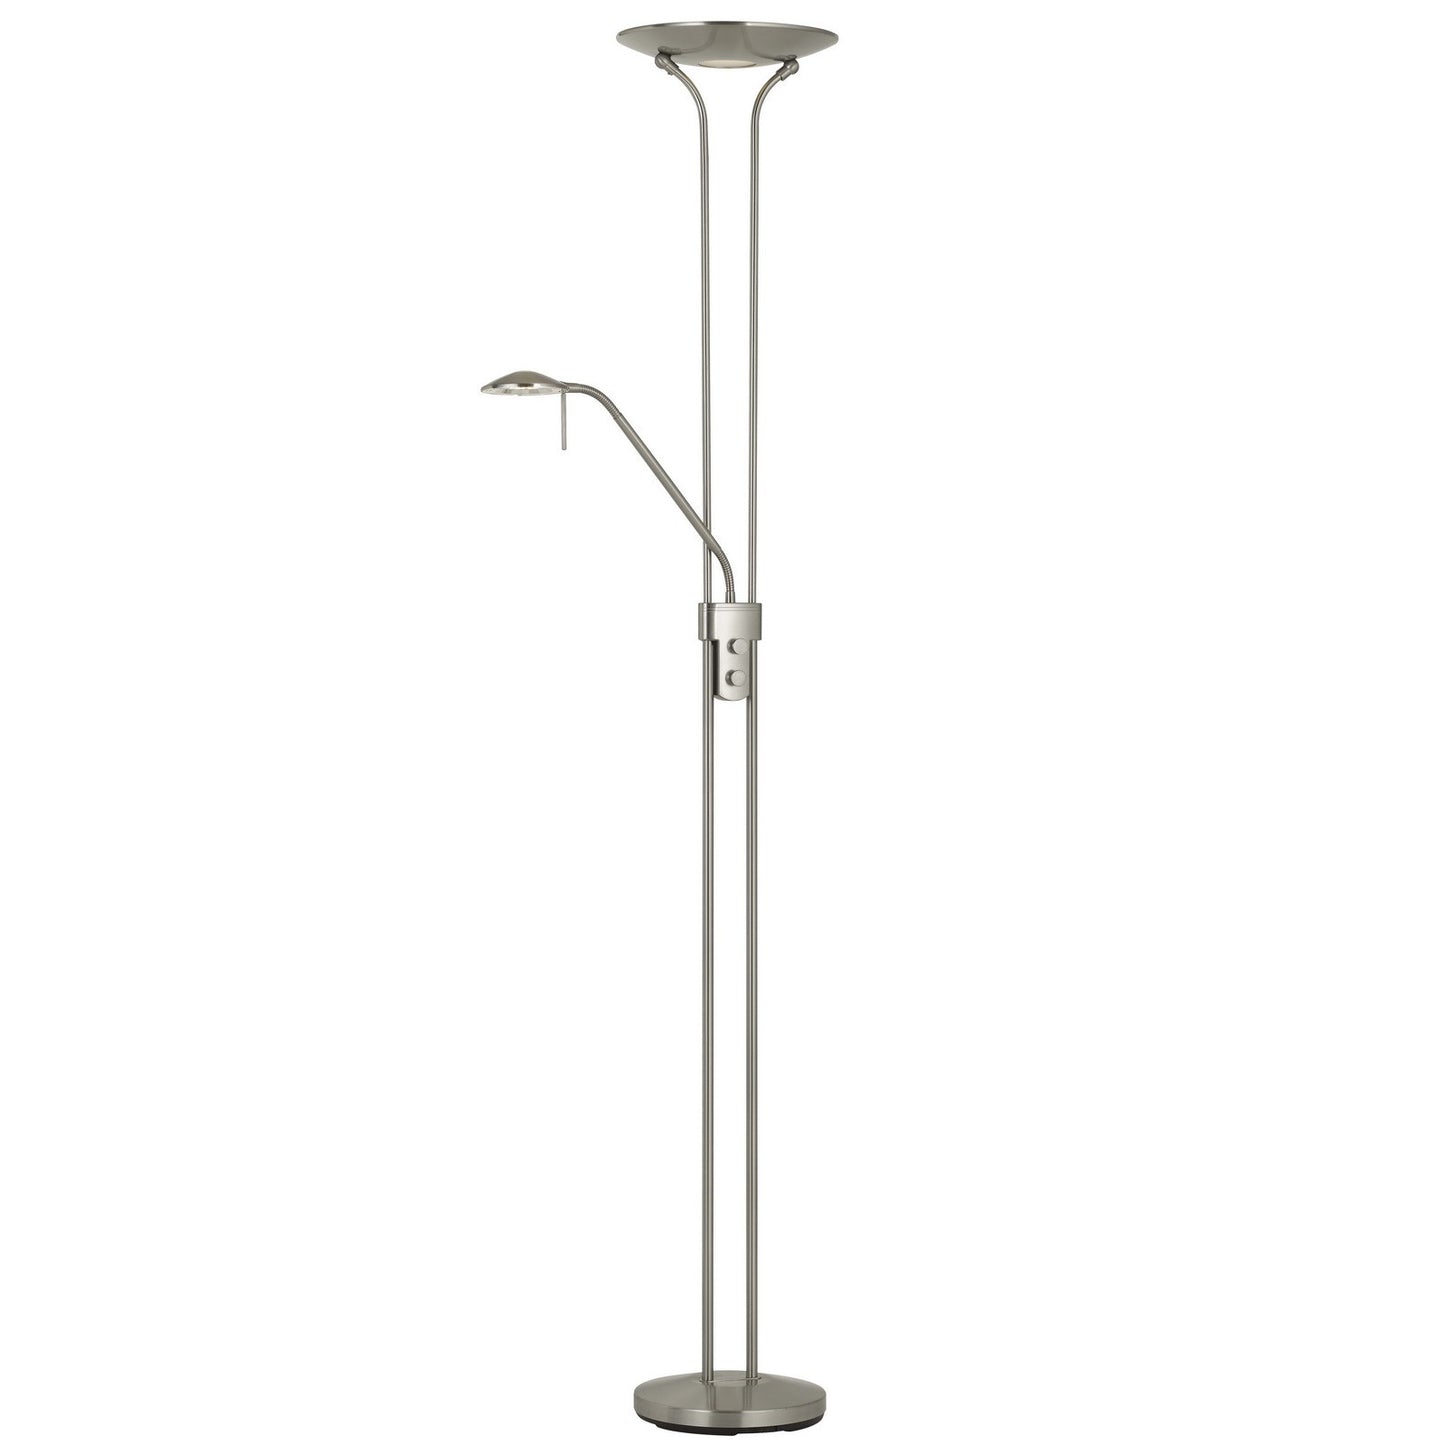 71" Nickel Led Torchiere Floor Lamp With Nickel Dome Shade